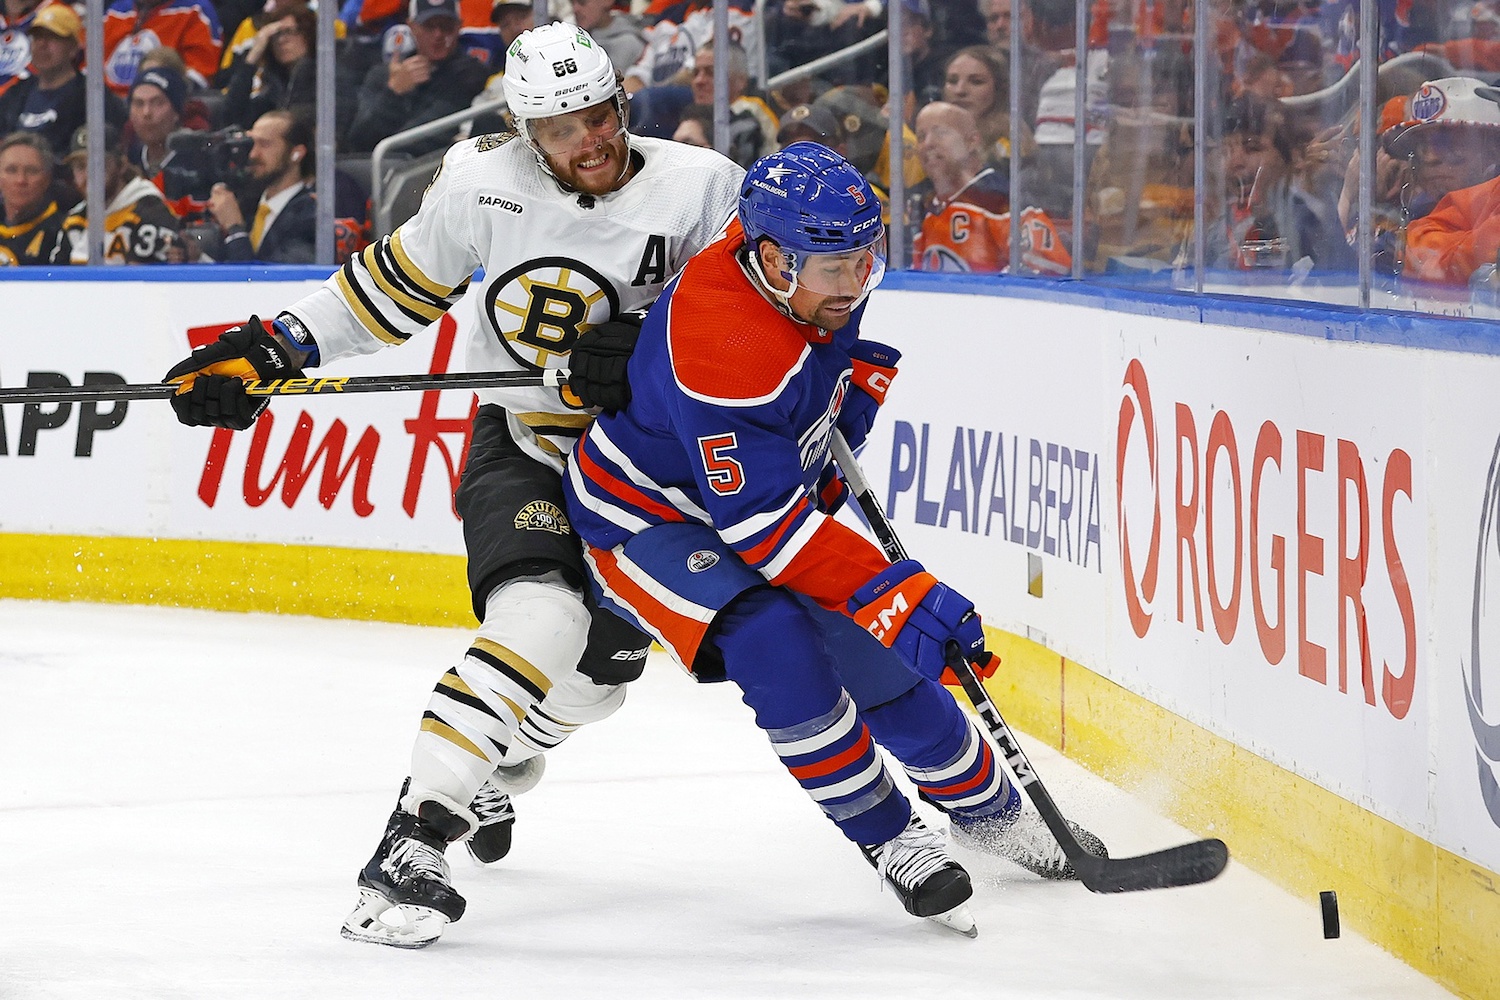 Feb 21, 2024; Edmonton, Alberta, CAN; Edmonton Oilers defensemen Cody Ceci (5) and Boston Bruins forward David Pastrnak (88) Battle along the boards for a loose puck during the second period at Rogers Place. Mandatory Credit: Perry Nelson-USA TODAY Sports